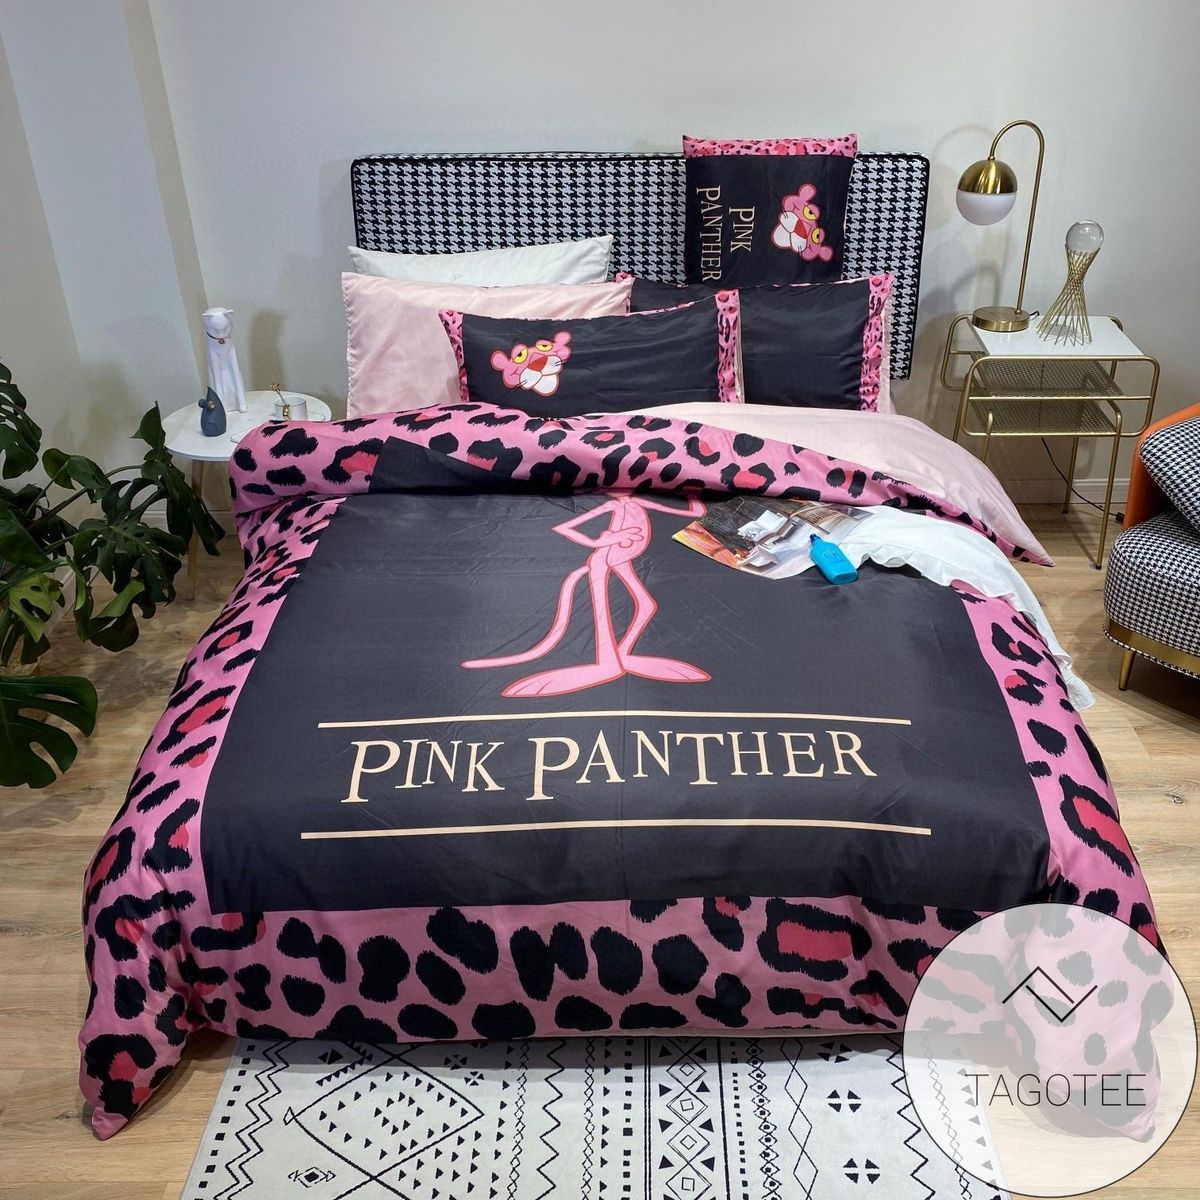 Pink Panther Cute Bedding Sets Duvet Cover Sheet Cover Pillow Cases Luxury Bedroom Sets 2022